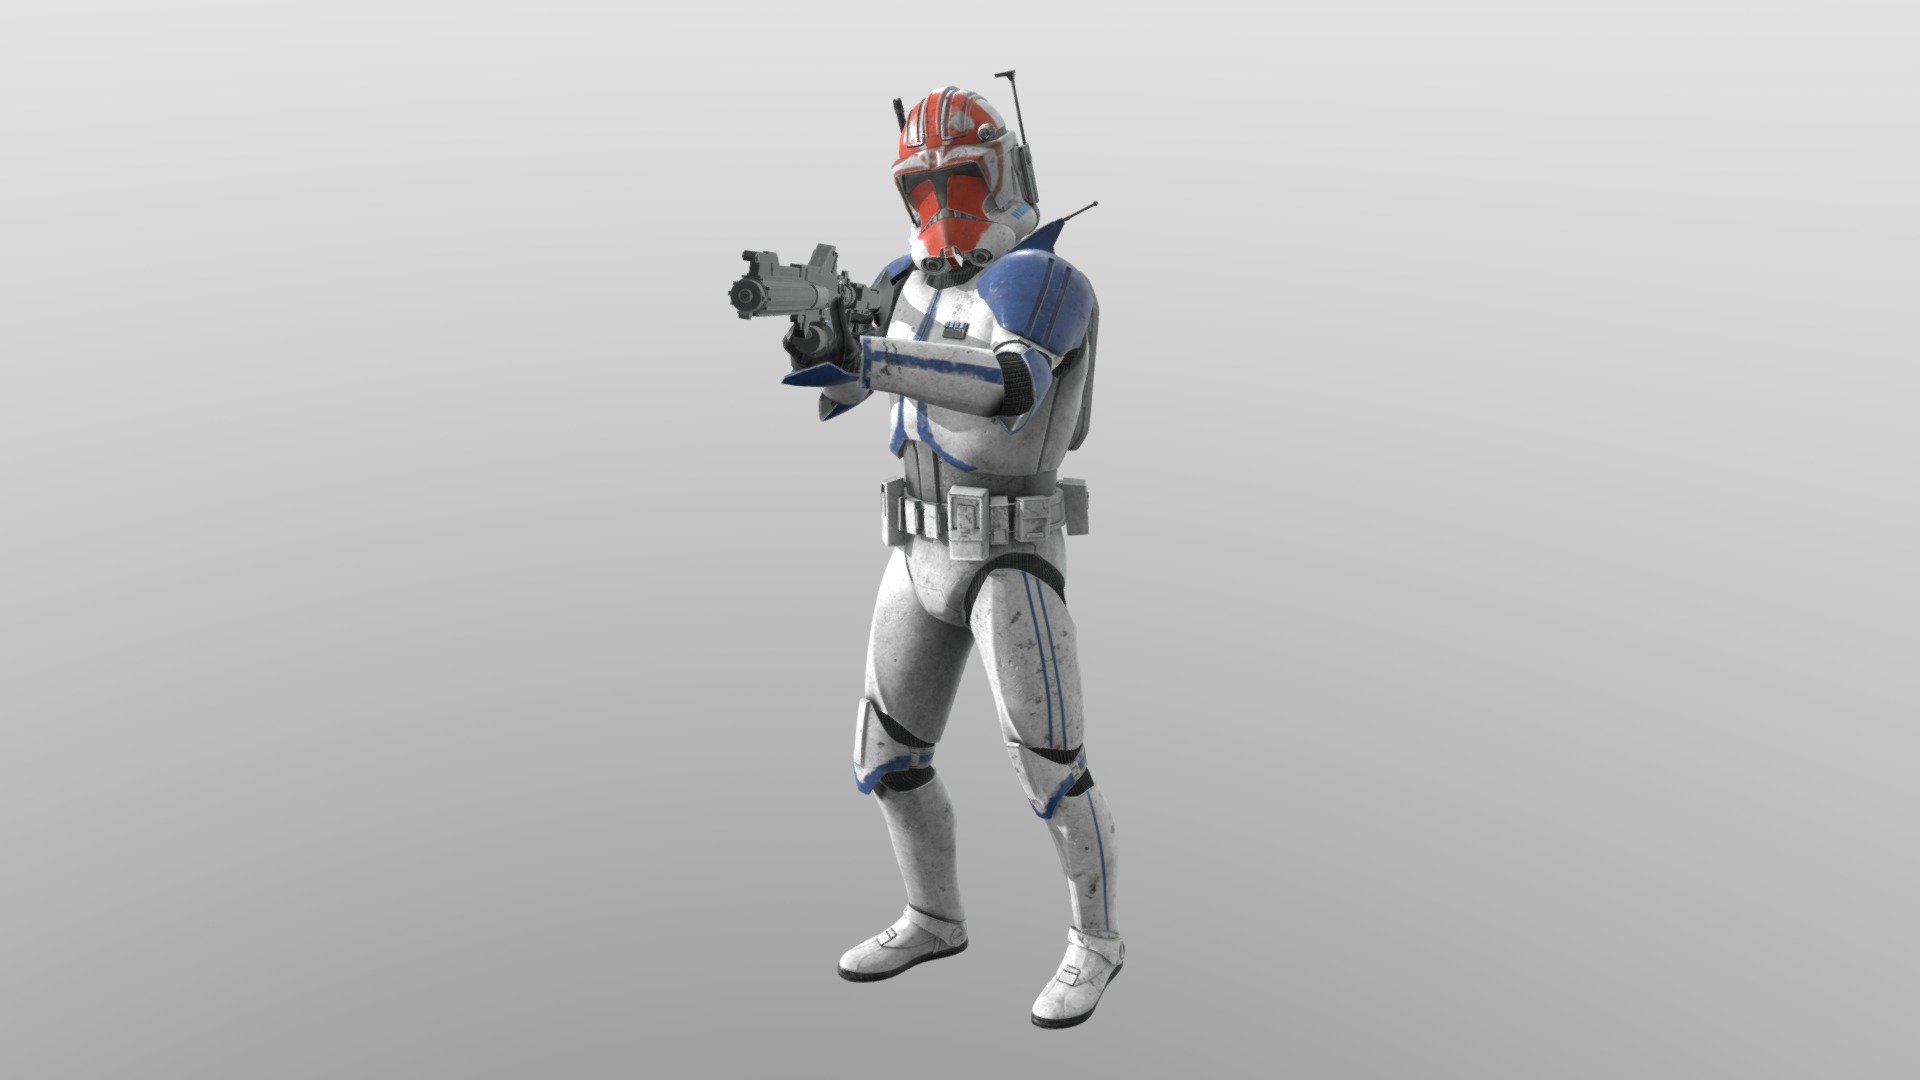 Hello There, new texture set made in my spare time. This one is Captain Vaughn from Clone Wars season 7.

Vaughn is a clone Captain who commanded the 501st alongside Commander Rex during the Battle of Mandalore.

Avaliable for Purchase Now in 4K and 8K on My Ko-Fi Page: https://ko-fi.com/s/8c20859fa1

Texturing done in Substance Painter and models from Frosty Mod Editor

The DC15 textures are NOT mine, only the Clone itself - Captain Vaughn Clone Wars Season 7 - Purchasable - 3D model by CommanderPrime 3d model